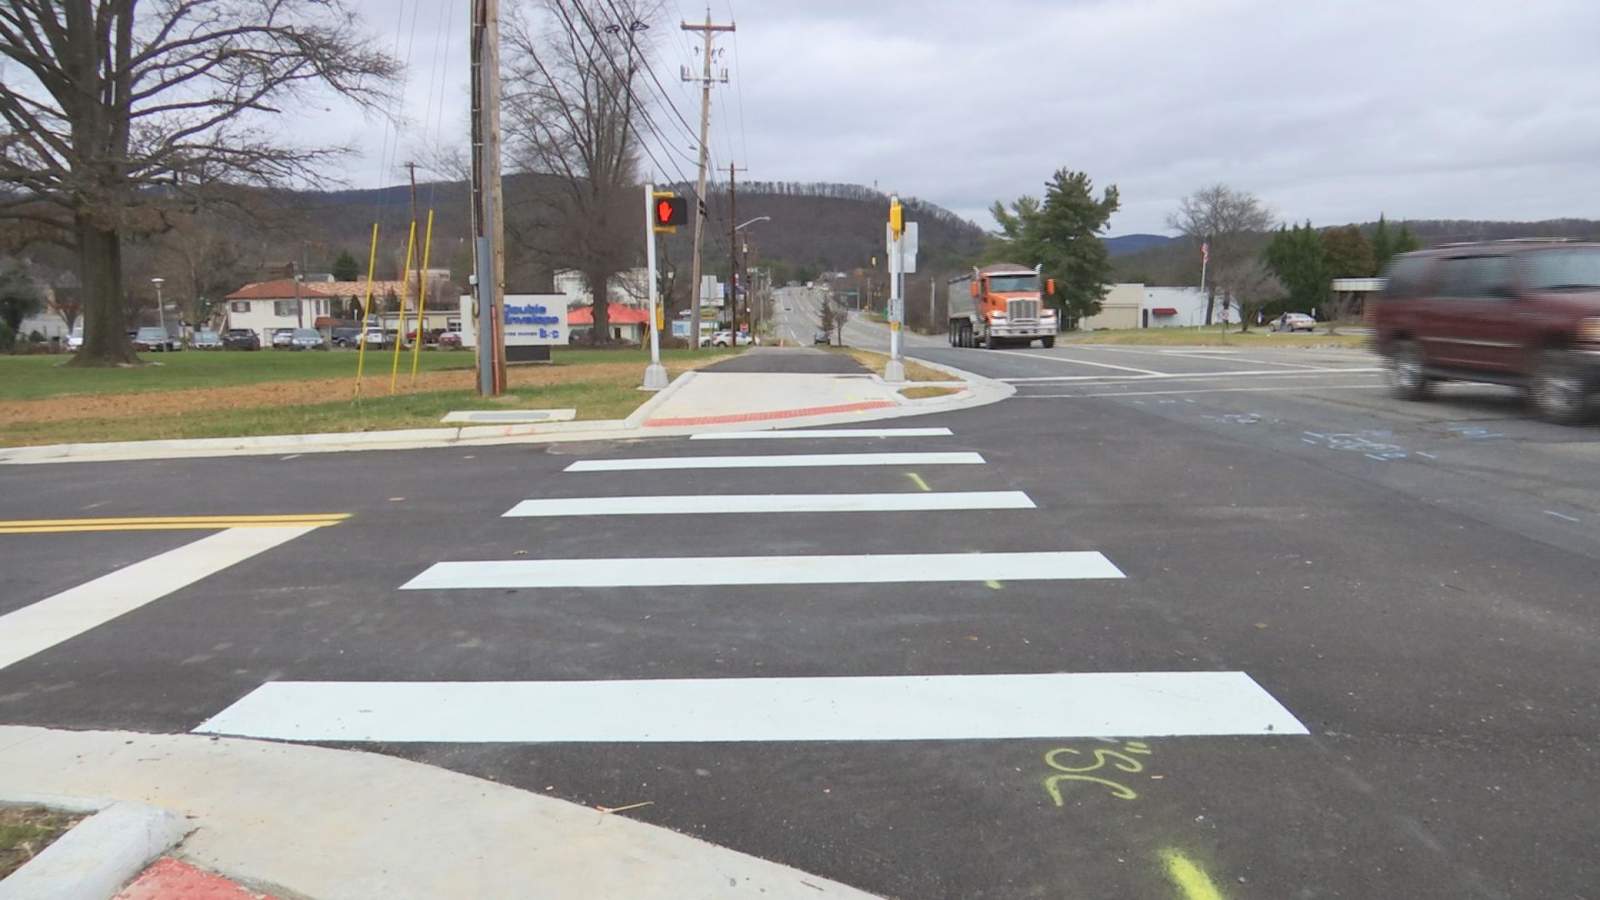 Pedestrian-friendly improvements nearly complete in Hollins